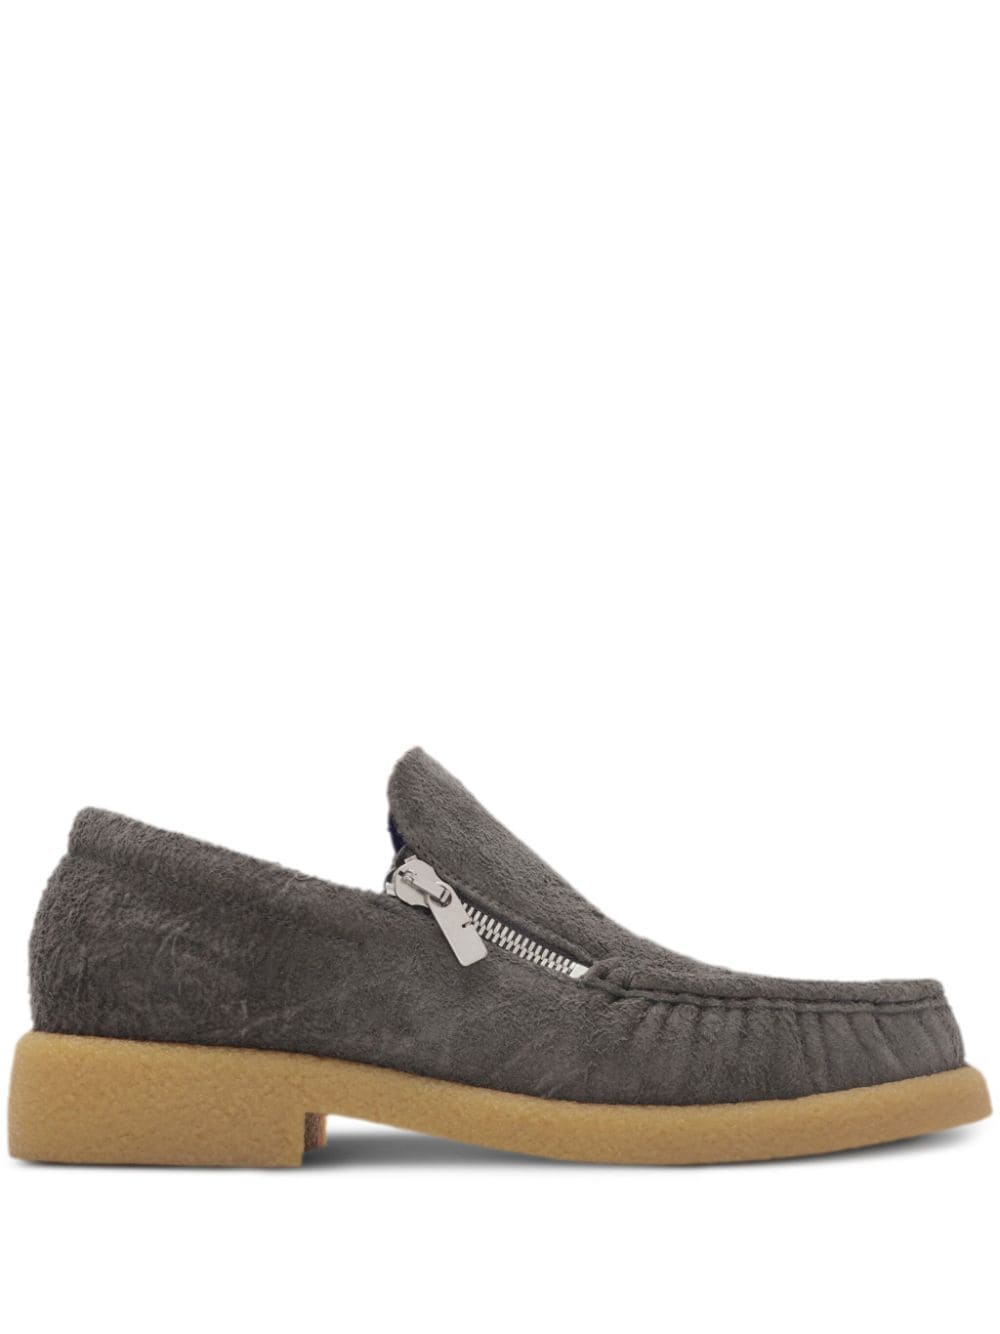 Burberry Chance Suede Loafers In Grey